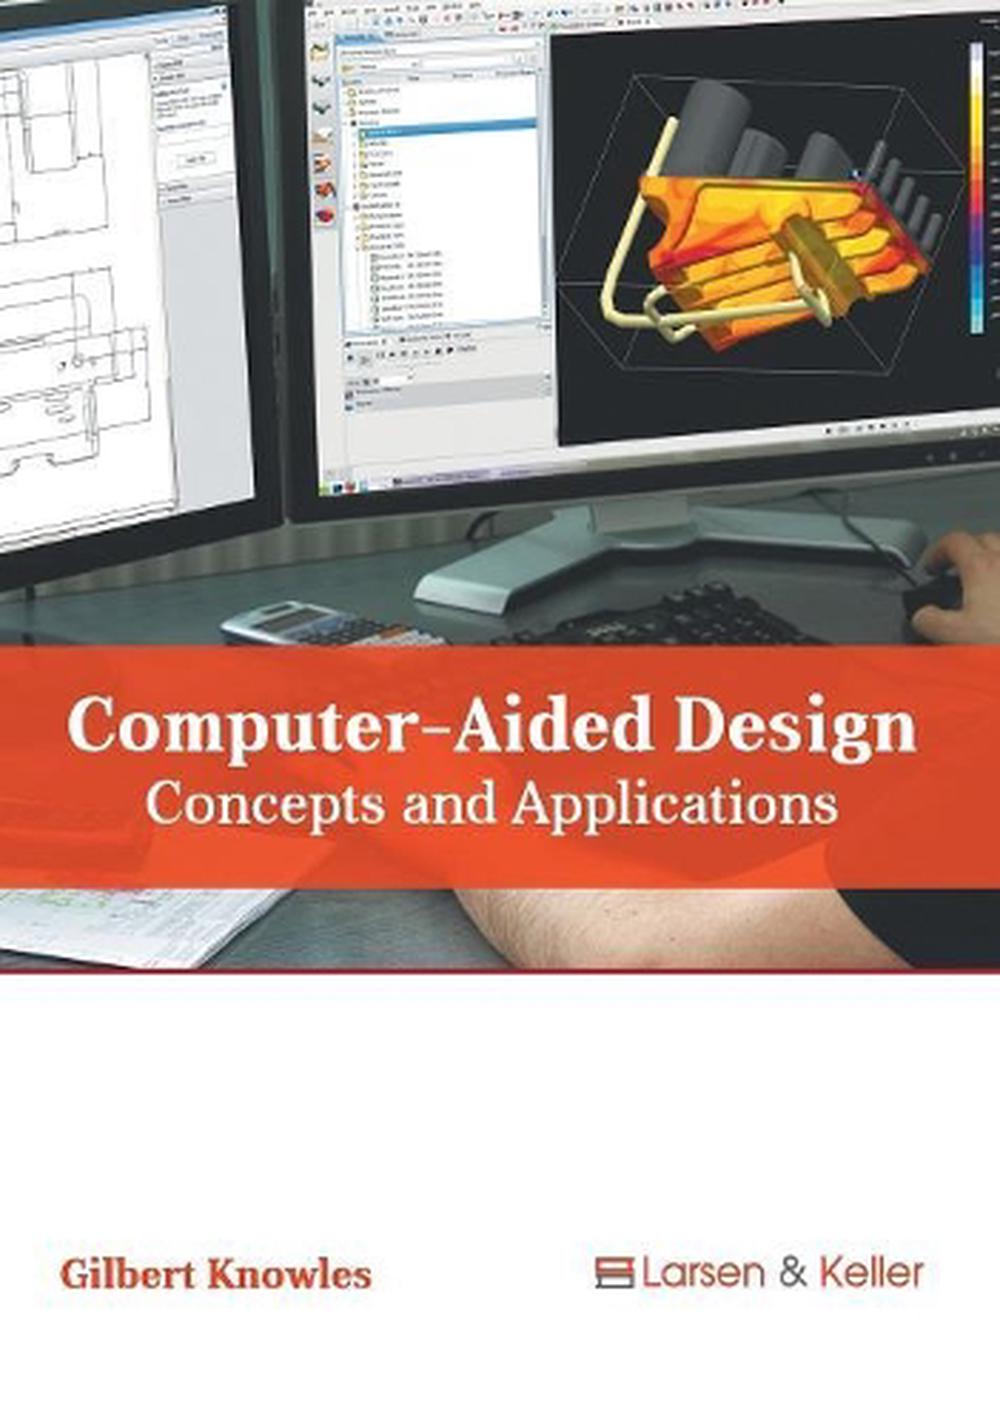 literature review on computer aided design